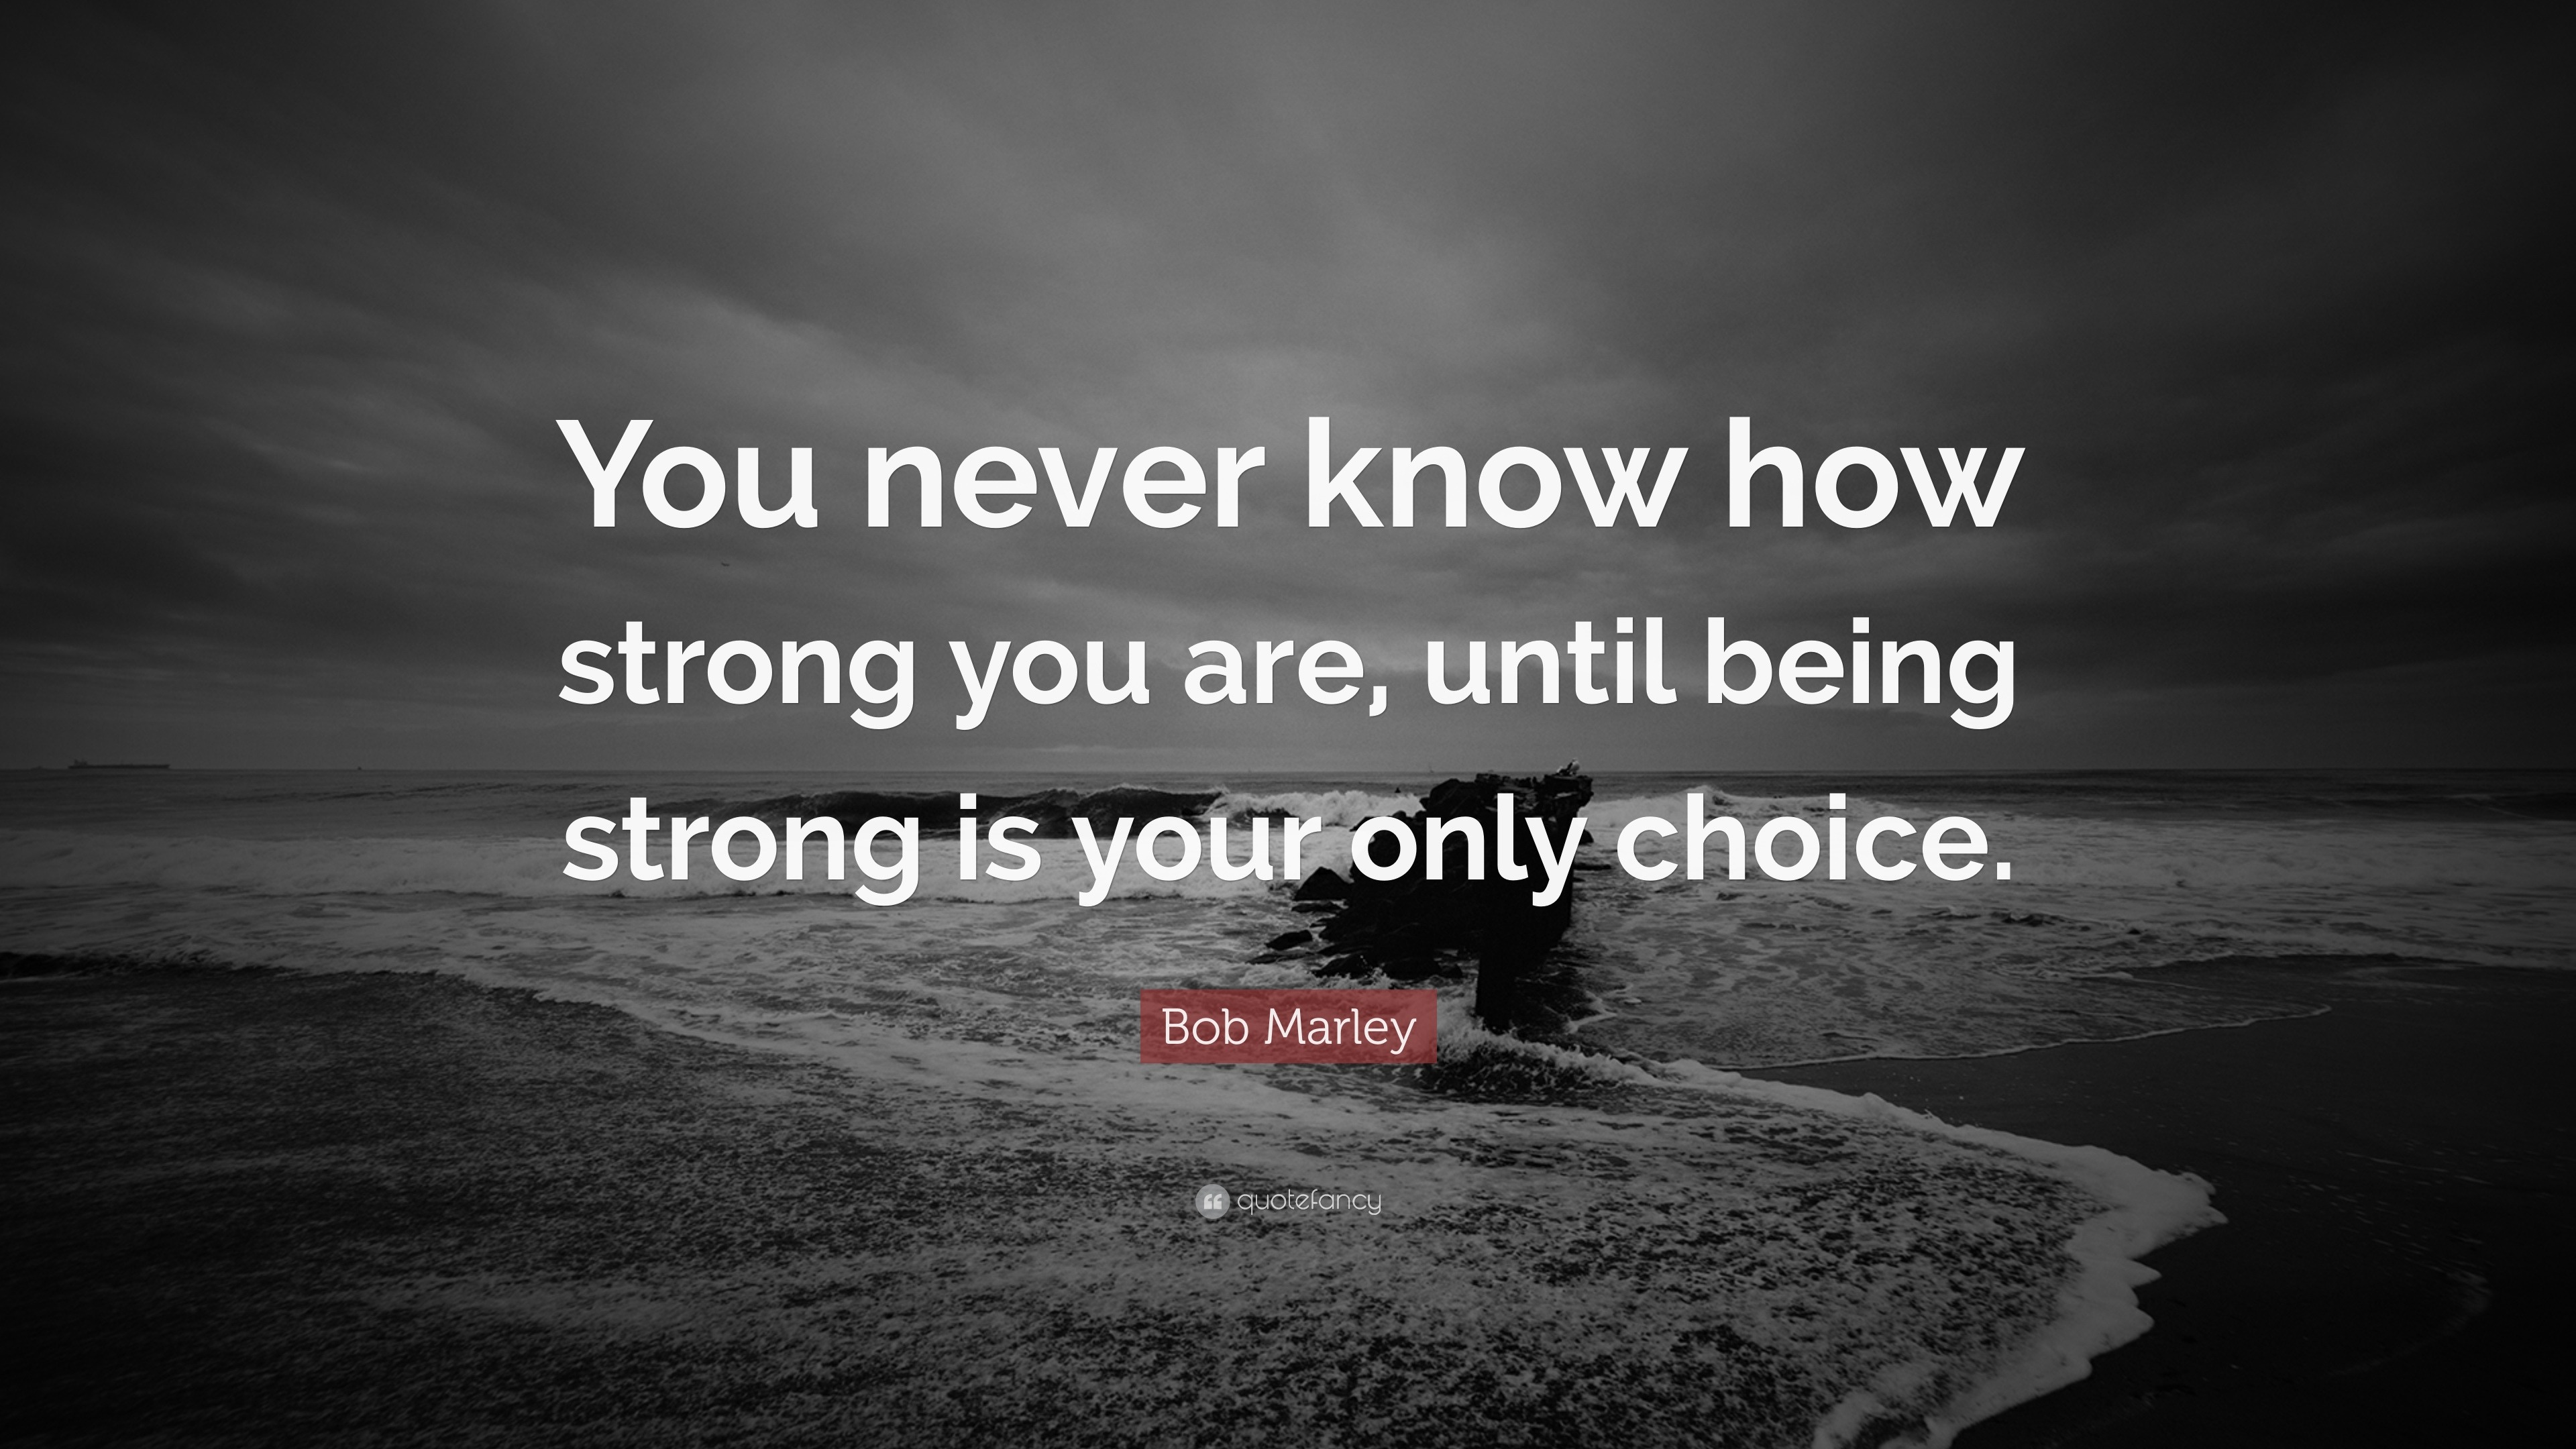 Bob Marley Quote: “You never know how strong you are, until being ...